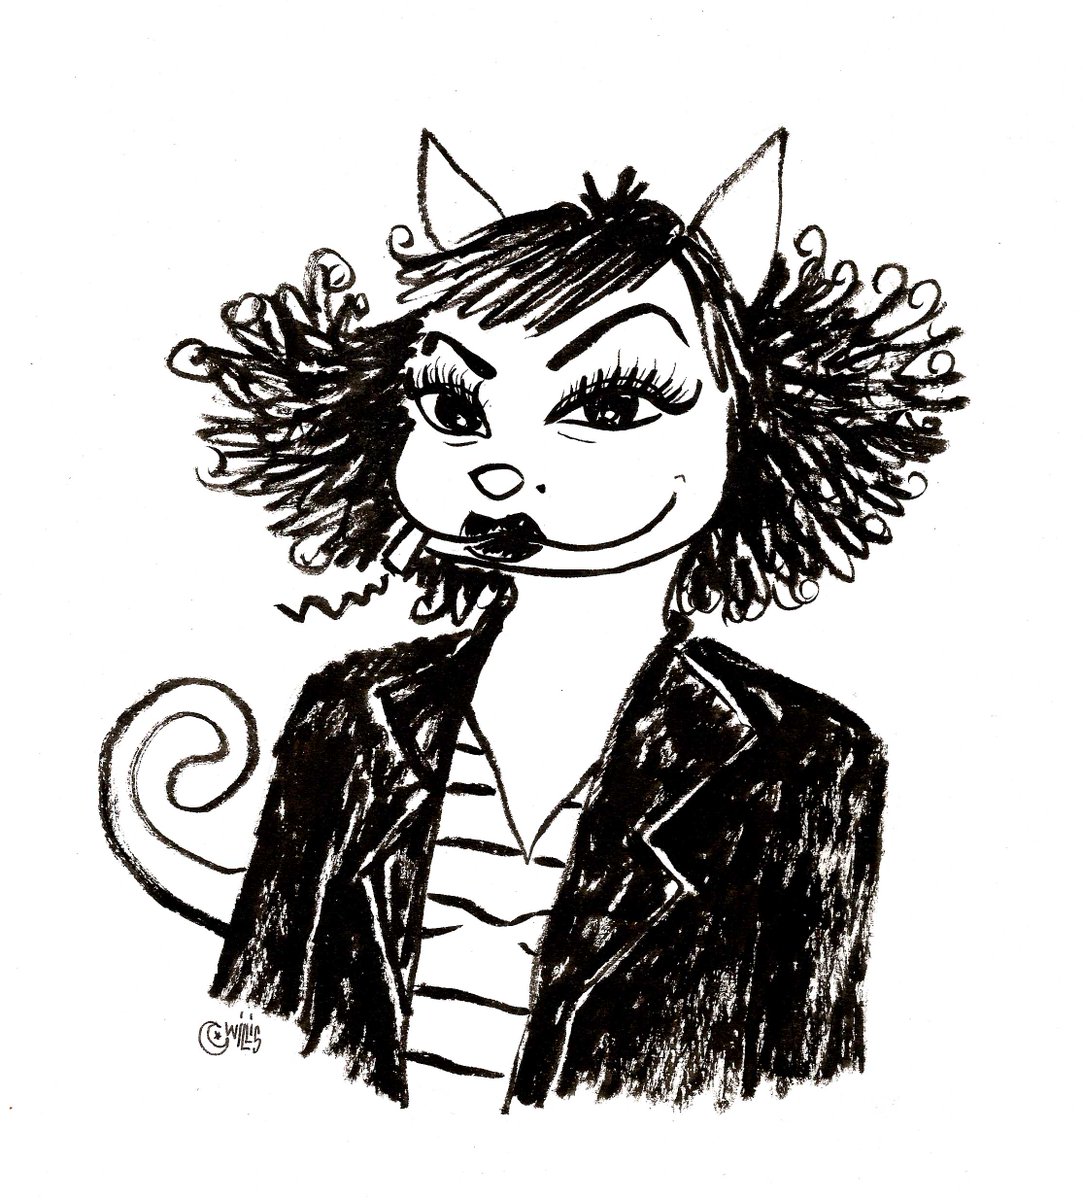 'With the revolution I was born, like a baby. My first screaming was my drawing' Birthday greetings to Nadia Khiari, cartoonist, graffiti #artist & member of Cartooning for Peace, famed for her Cat of the Revolution Willis from Tunis, celebrating the Arab Spring #womensart